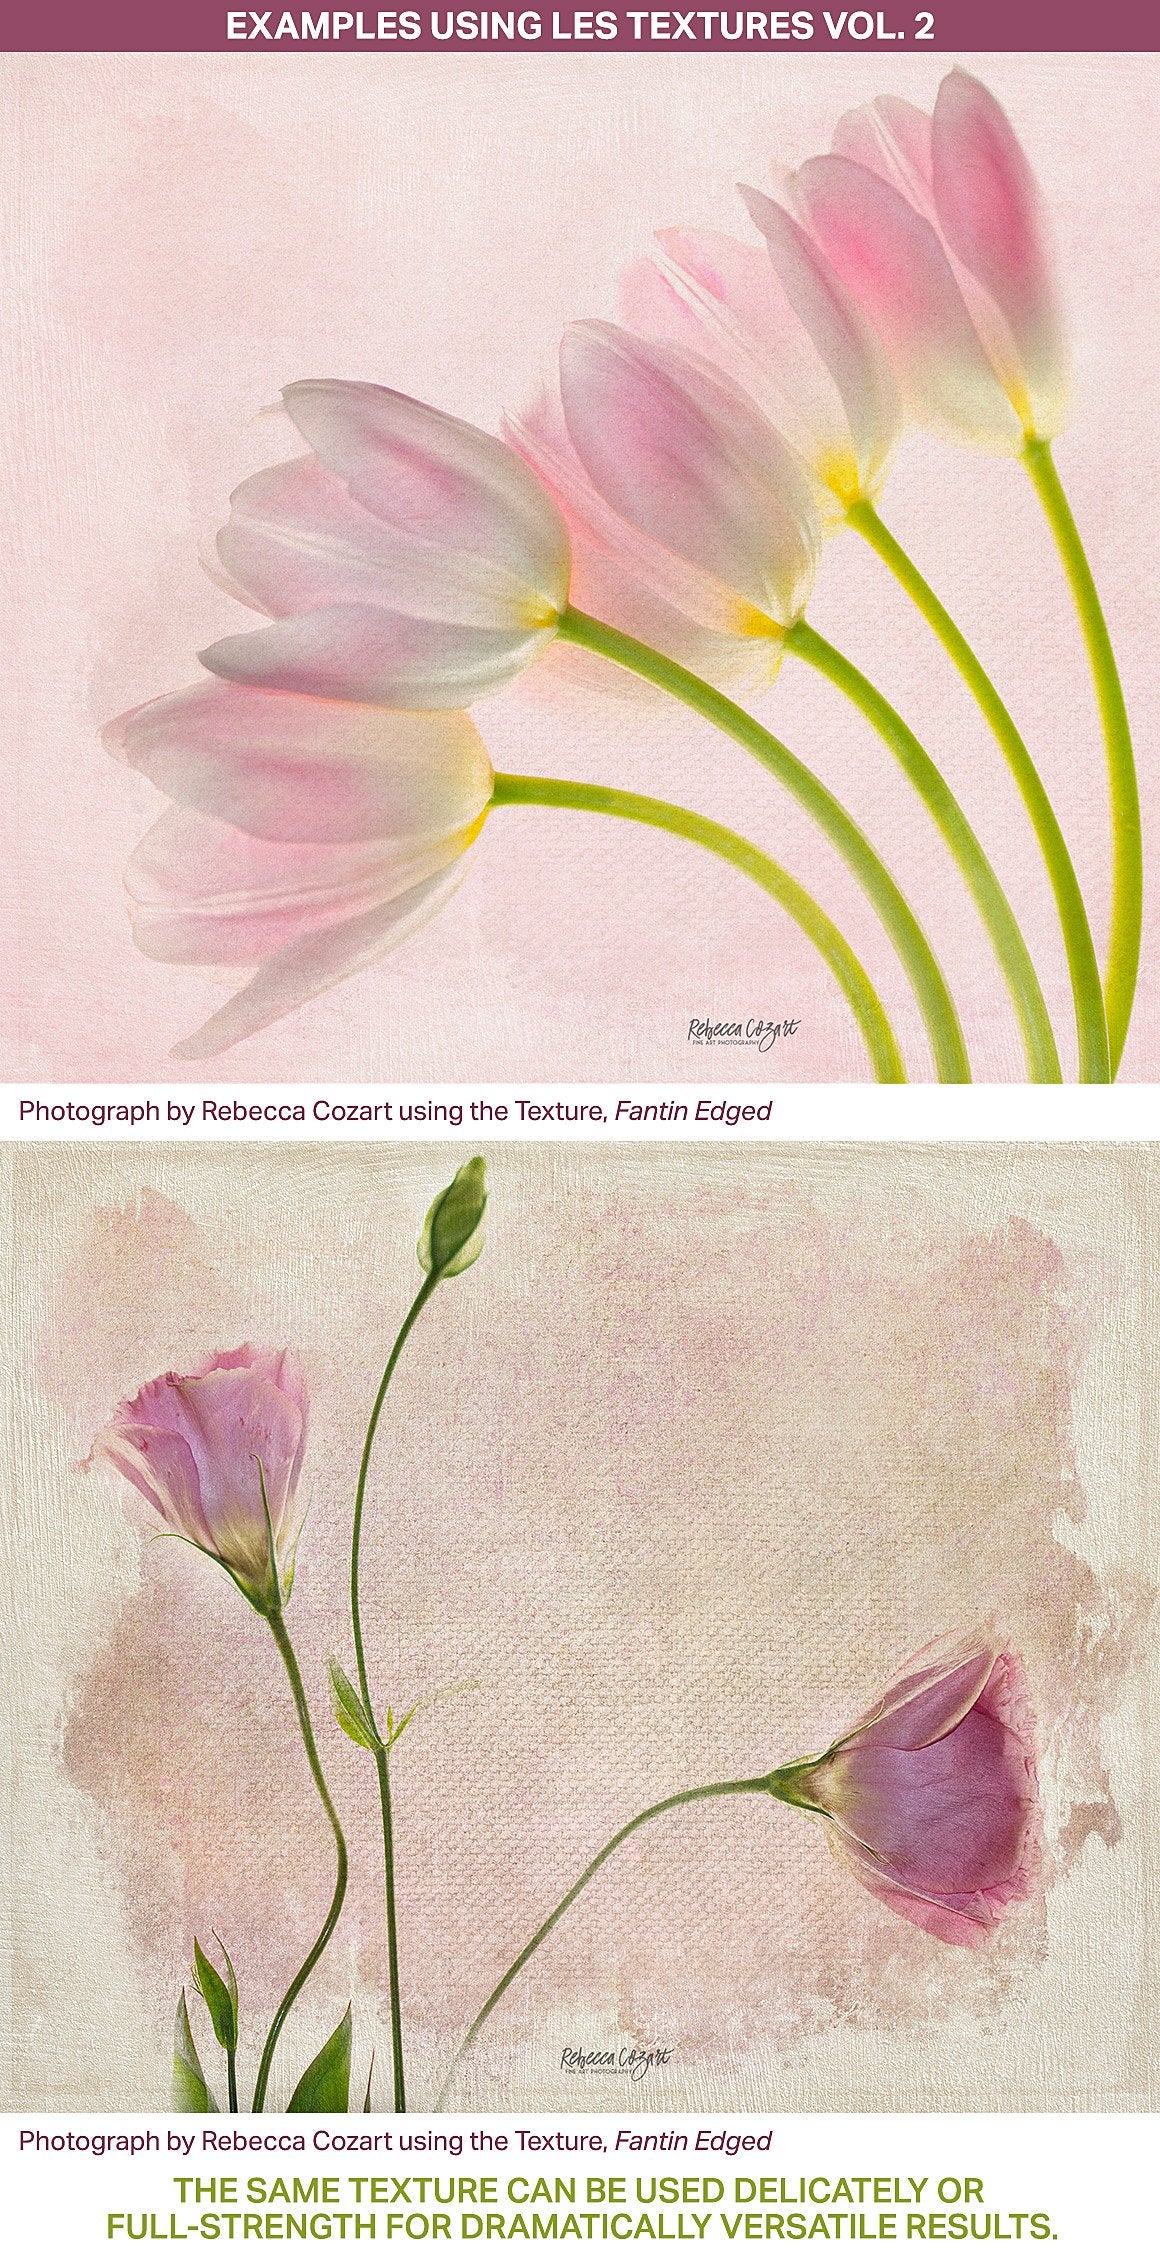 Textured floral photography examples using the Les Textures 2 Collection. 